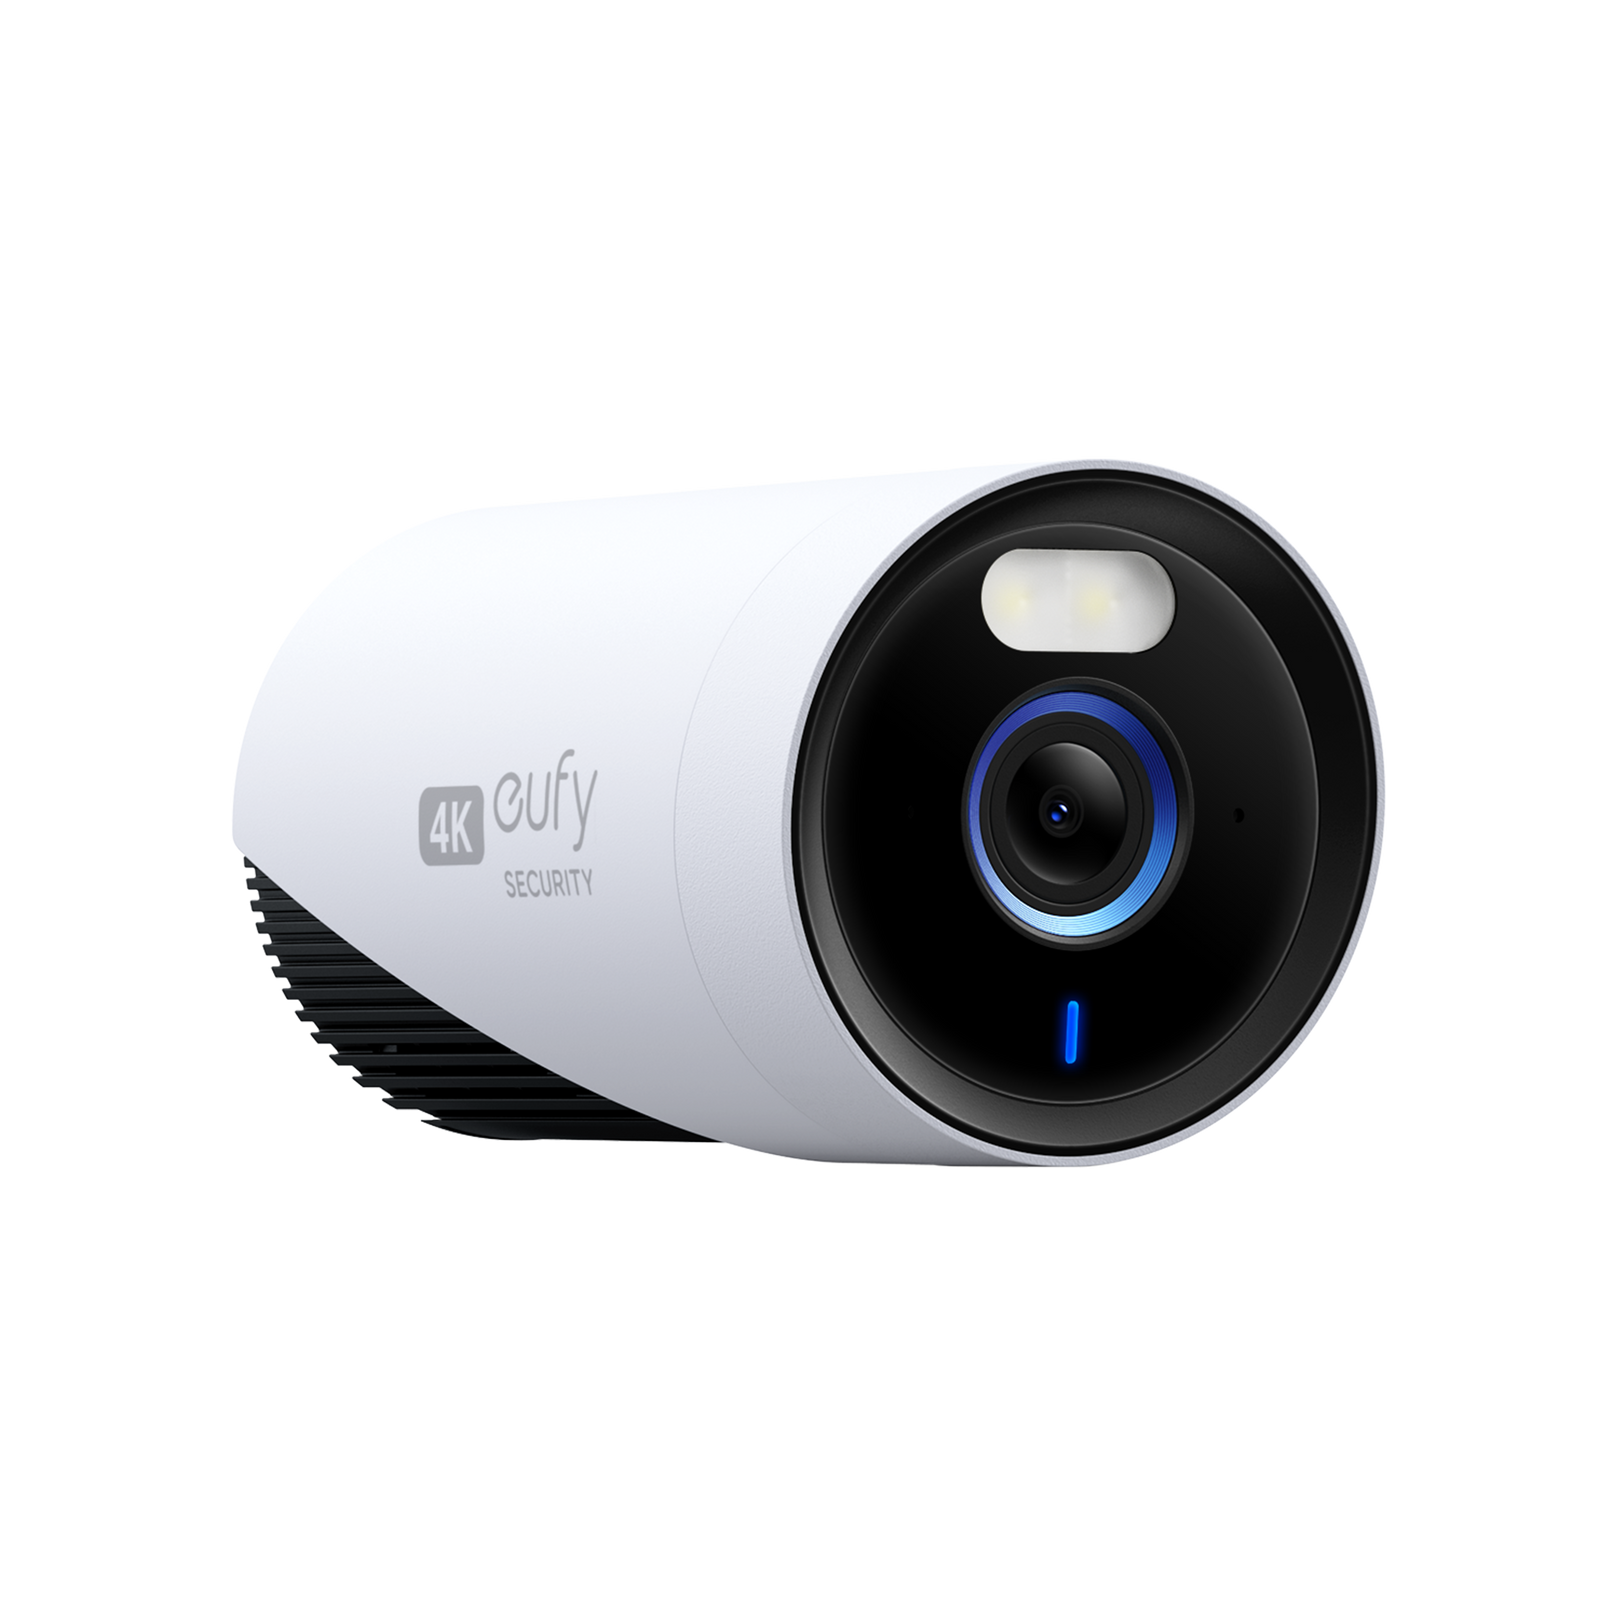 Eufy Edge Security System hands-on: The most advanced security cameras yet?